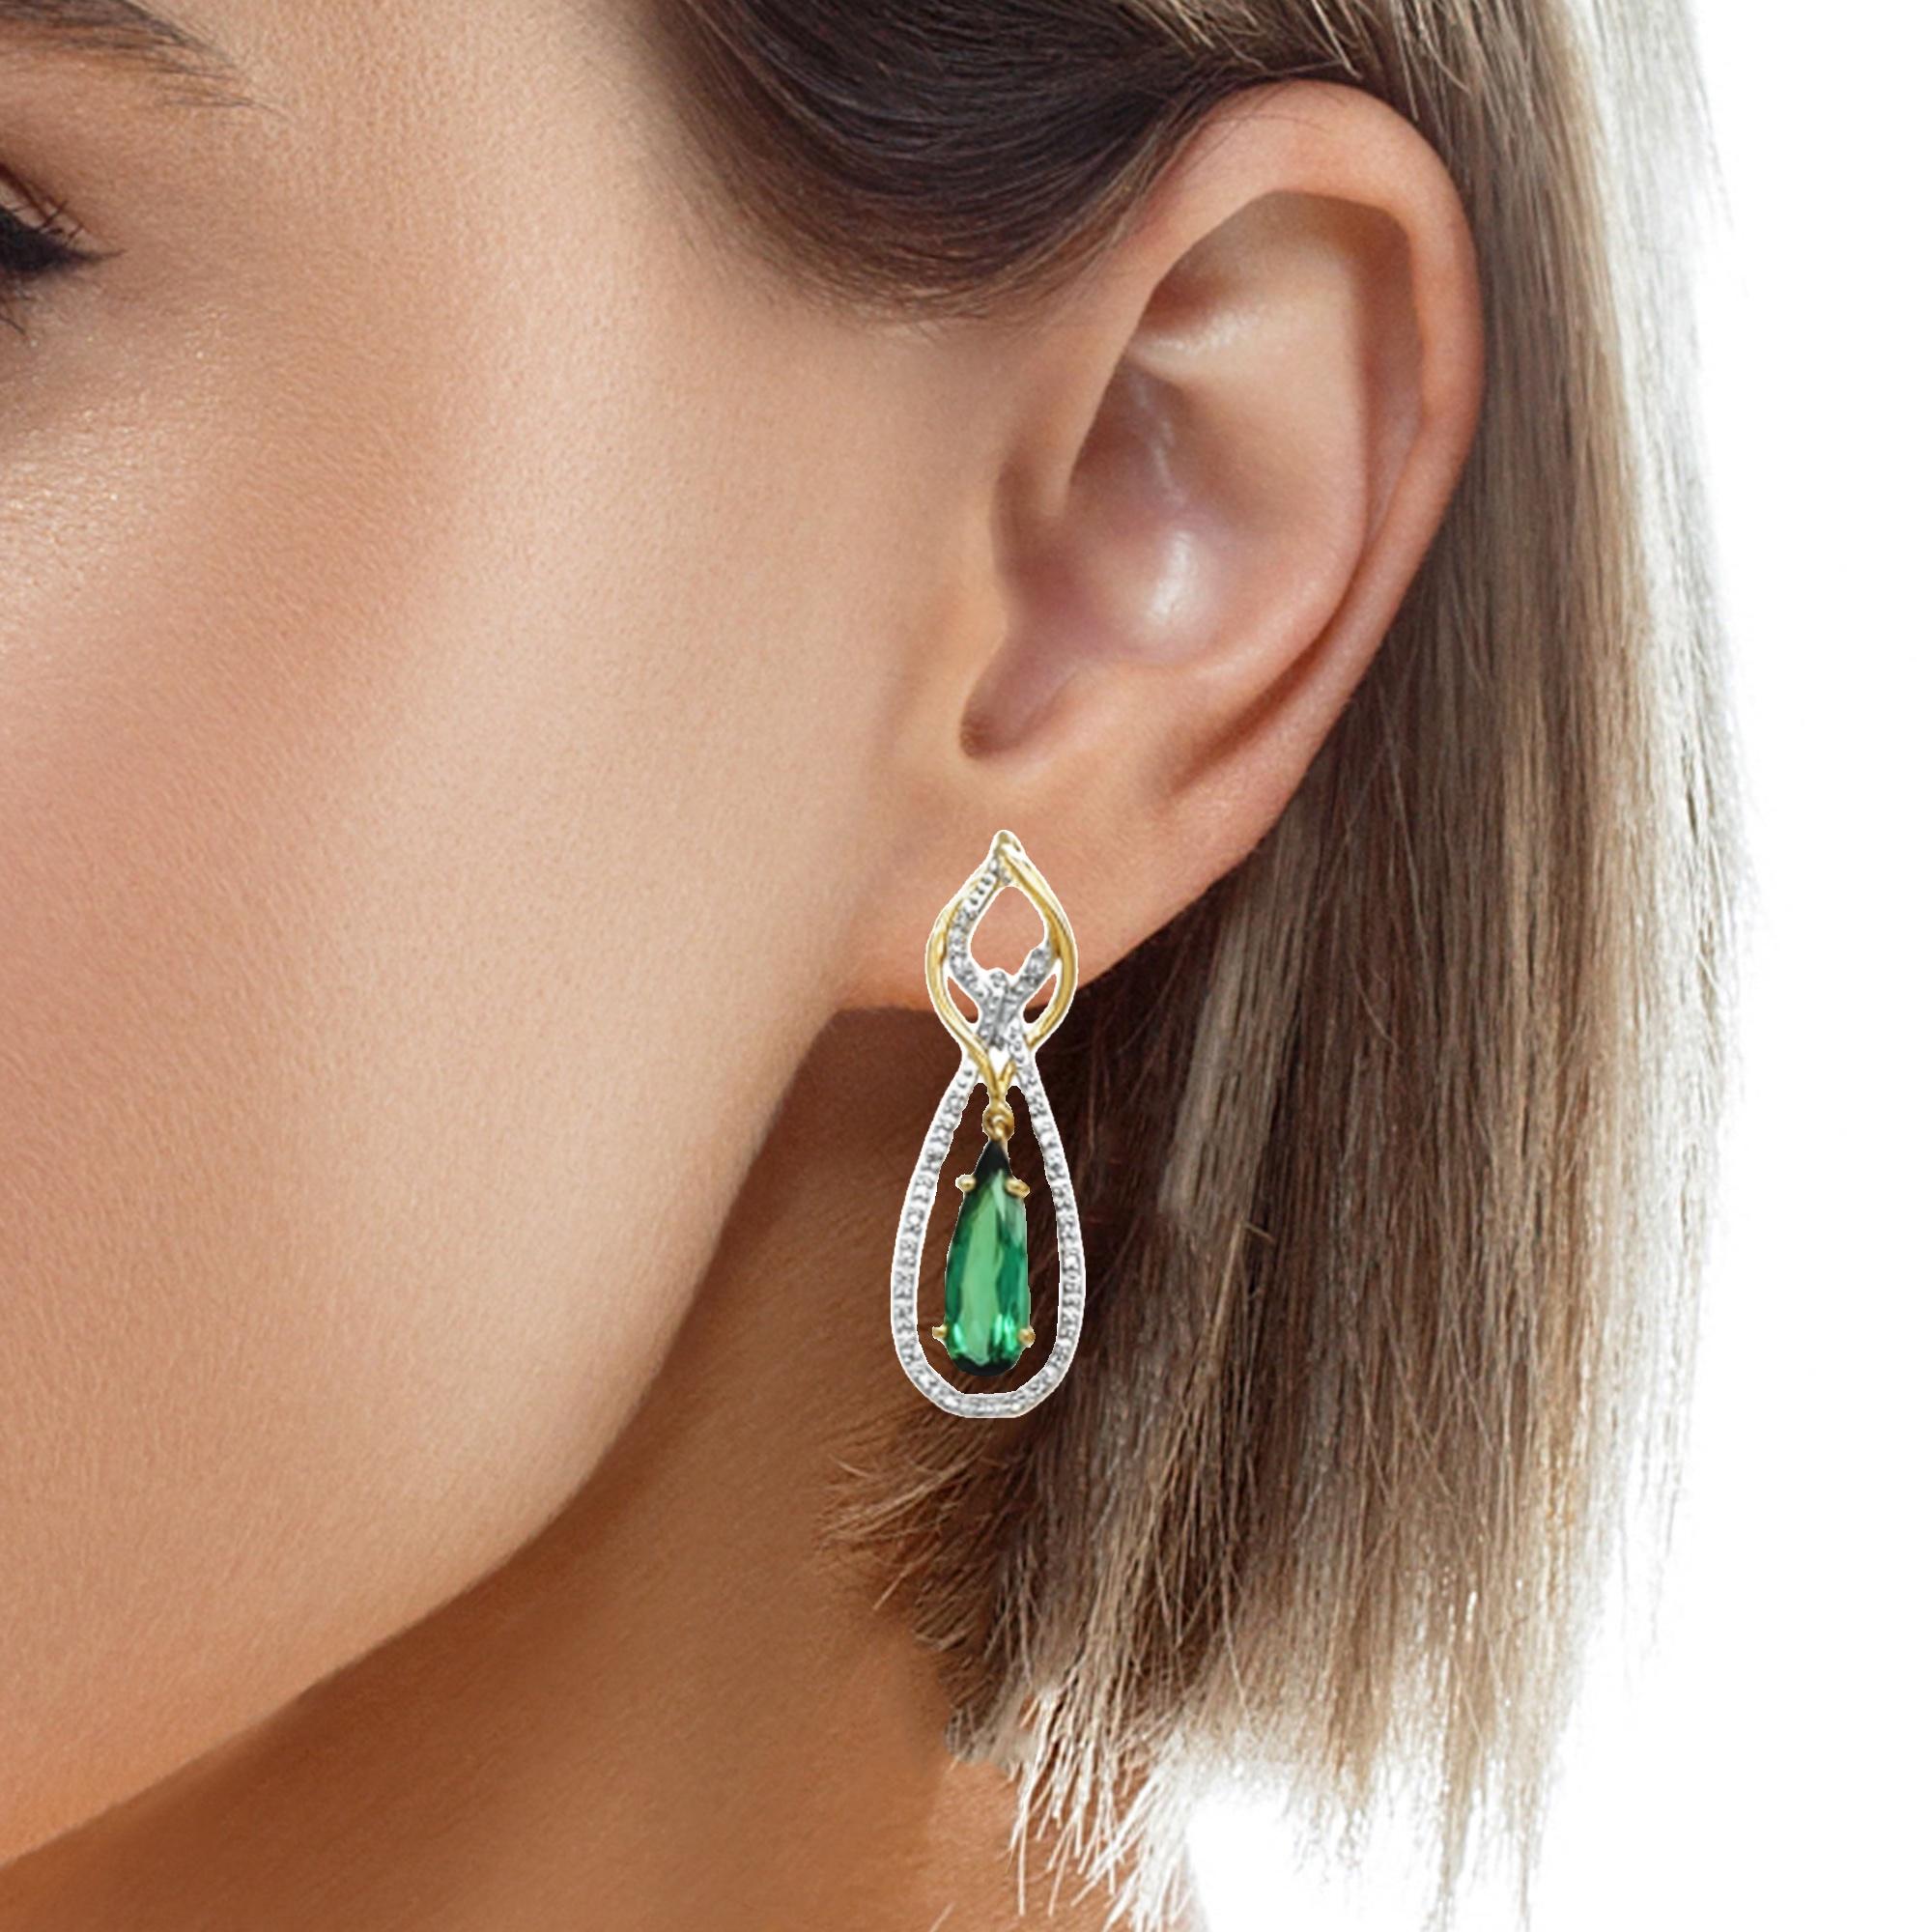 Green tourmaline and diamond dangle drop earrings in mixed color 18k gold. The pear shape tourmalines weigh a total of 3.40 carats and match perfectly. 
The earrings are crafted in 18k white and yellow gold. The white gold has diamond pave totaling